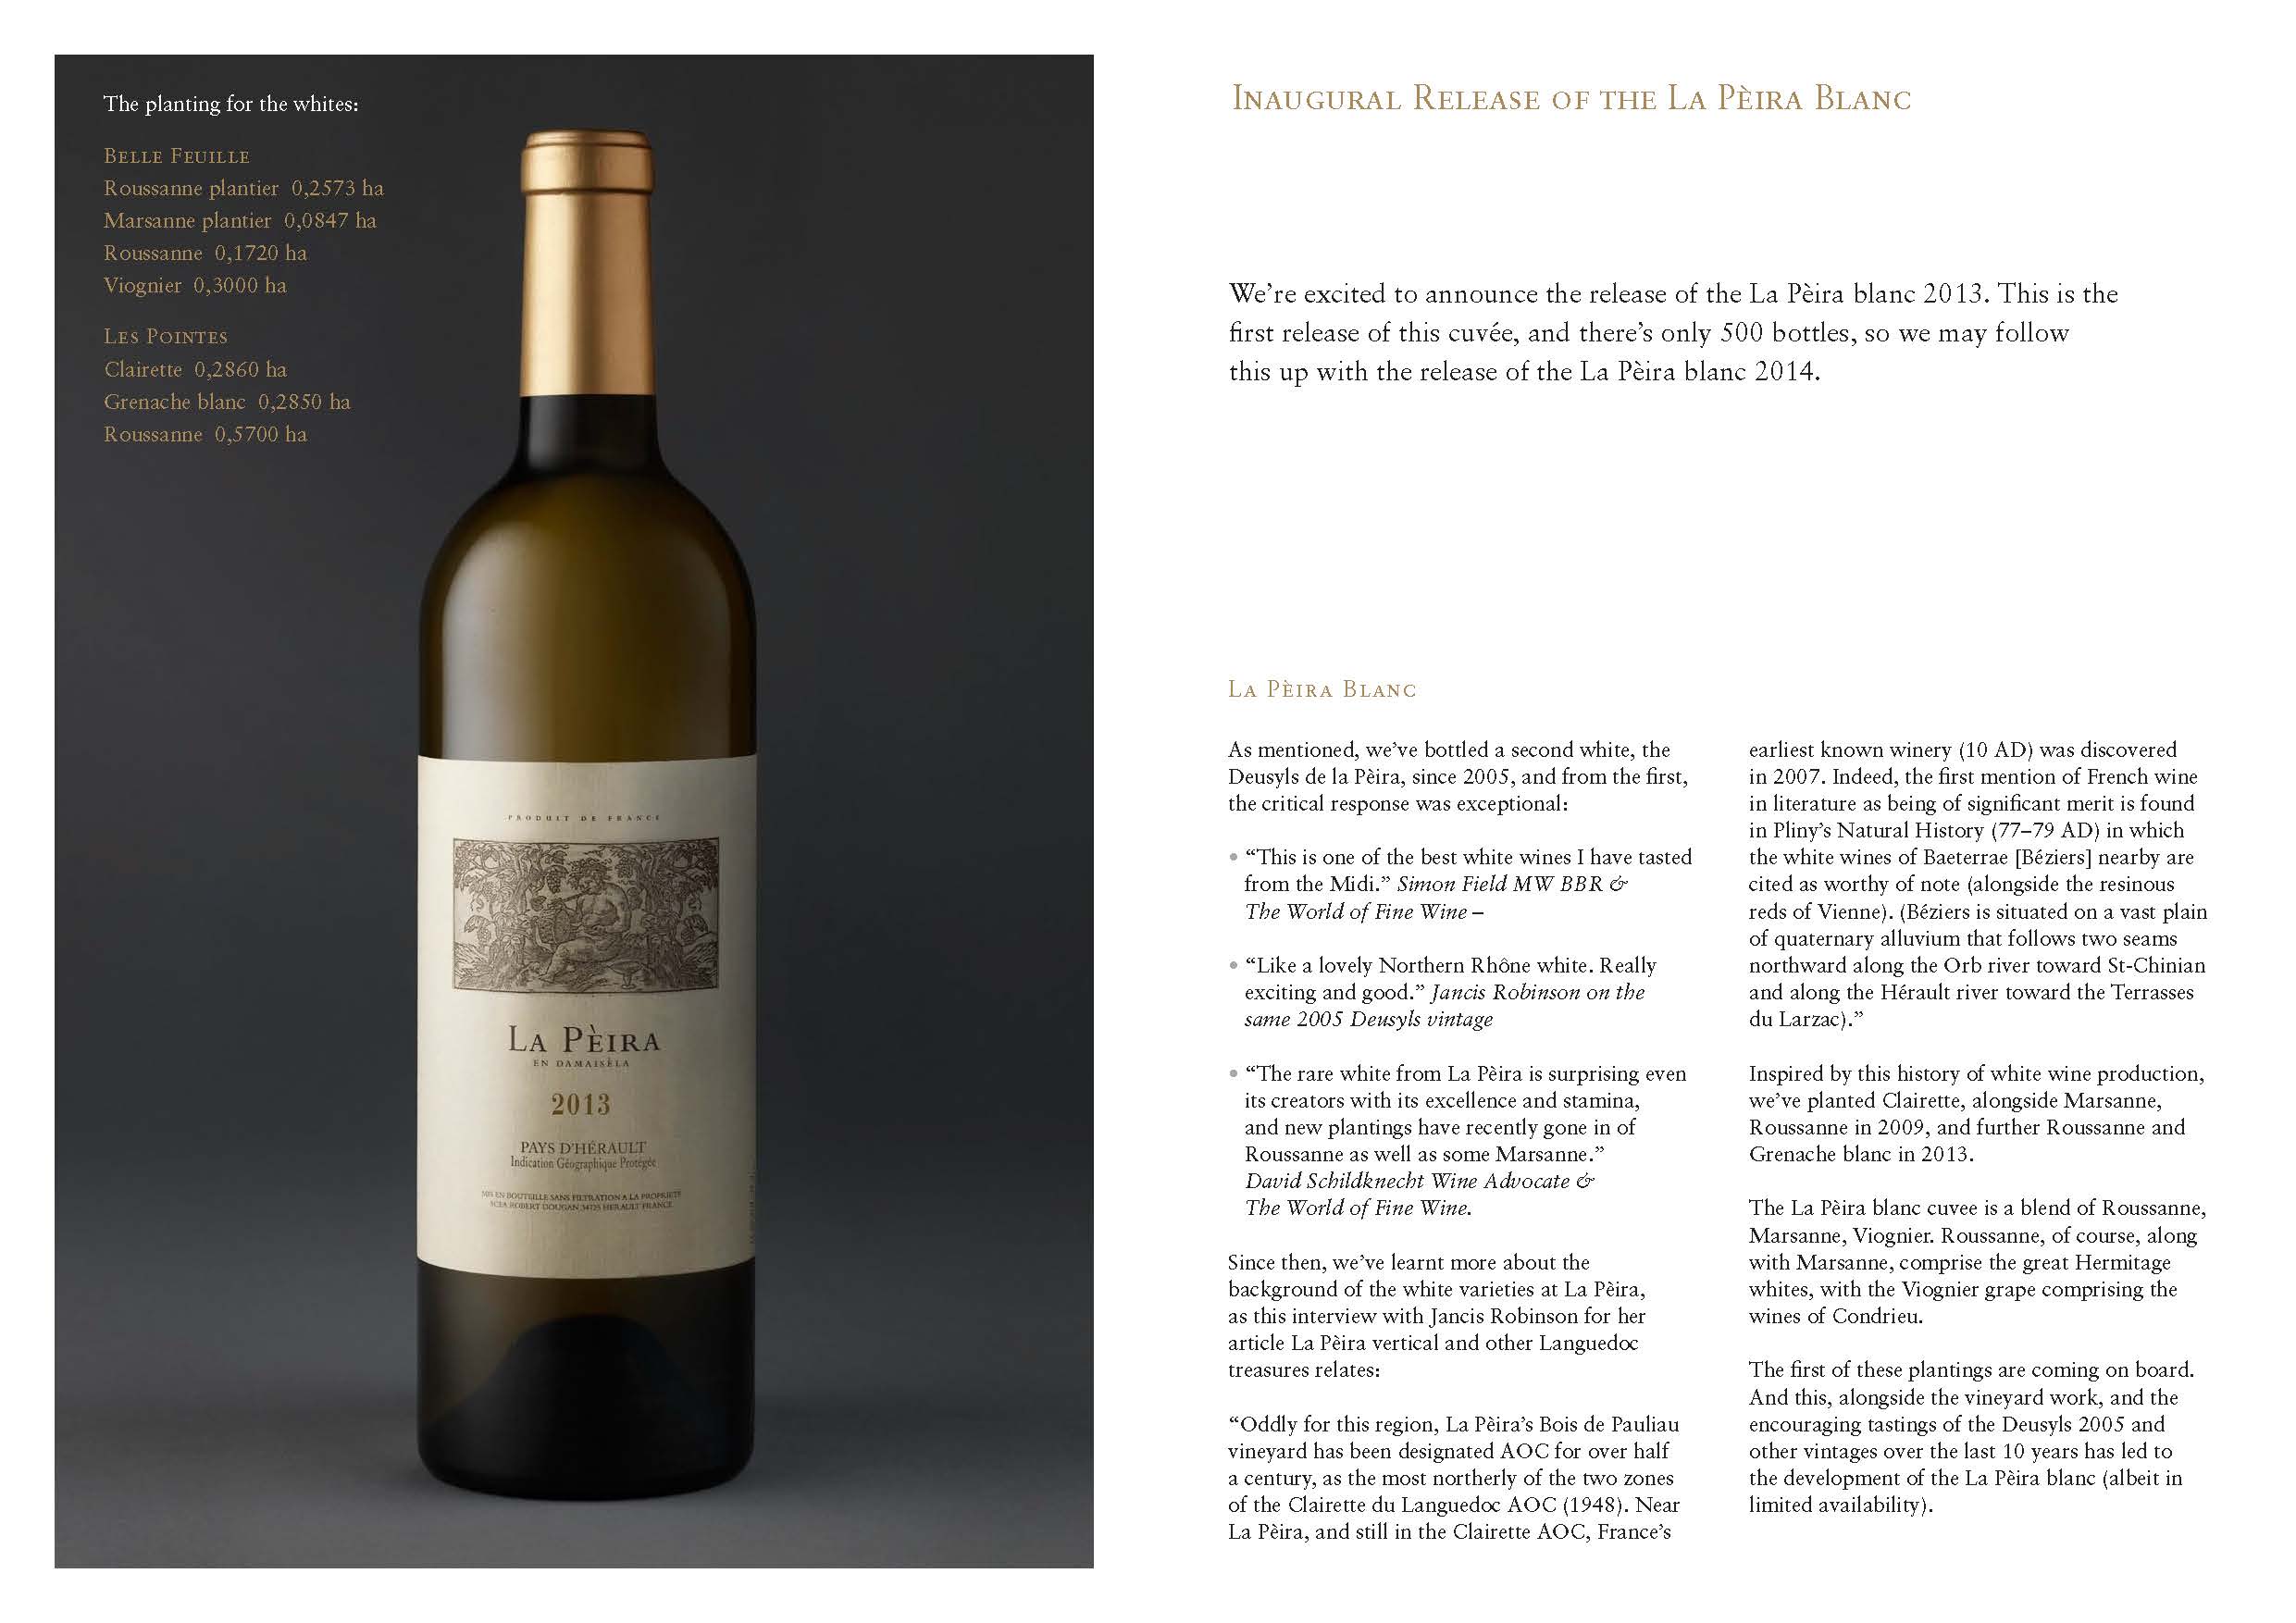 La Peira 2013 Vintage: “In contrast to elsewhere in France, 2013 was a superb vintage in Languedoc-Roussillon” La Peira